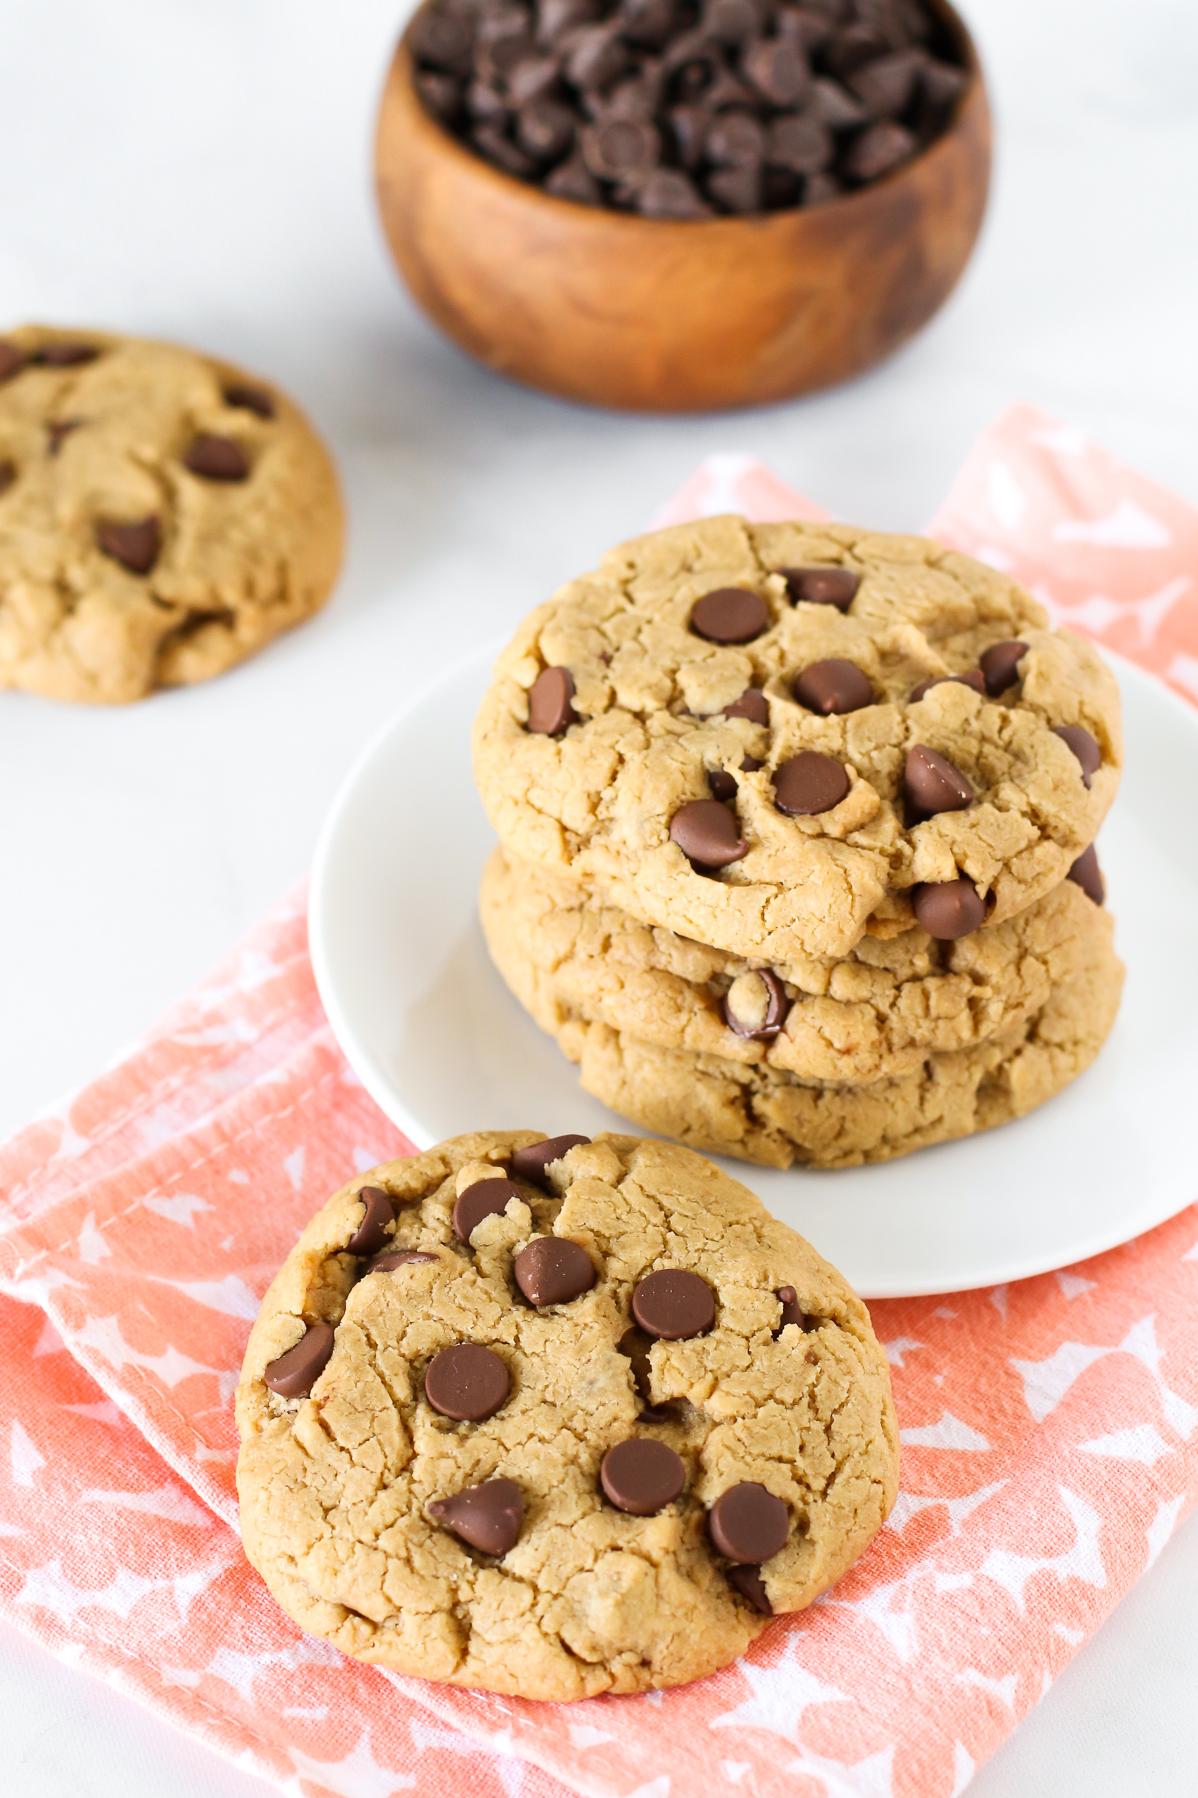  Chocolate chips and peanut butter are a match made in heaven - these cookies will make your taste buds do a happy dance!